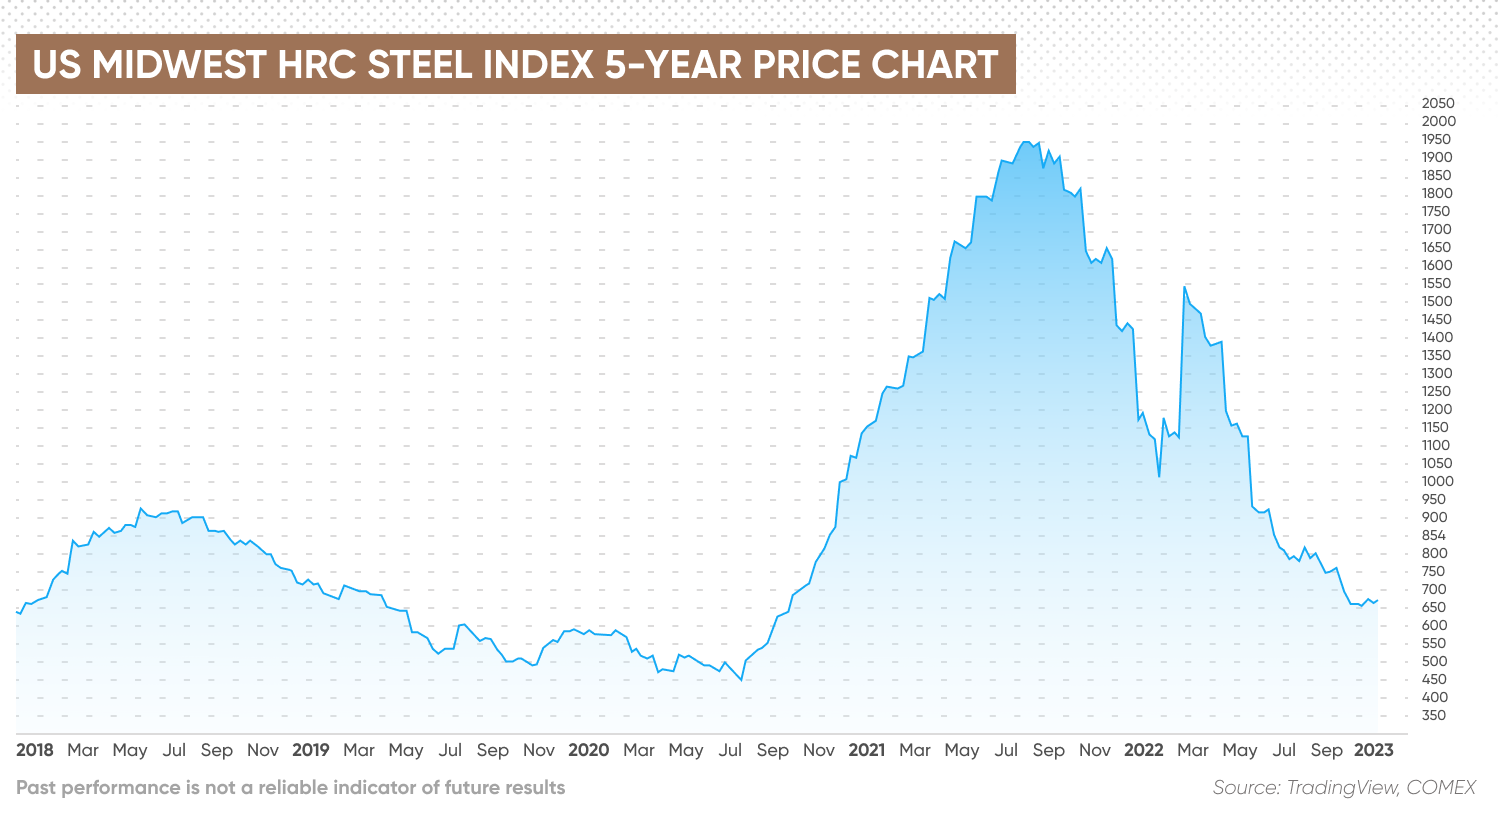 US Midwest HRC Steel Index 5-Year Price Chart